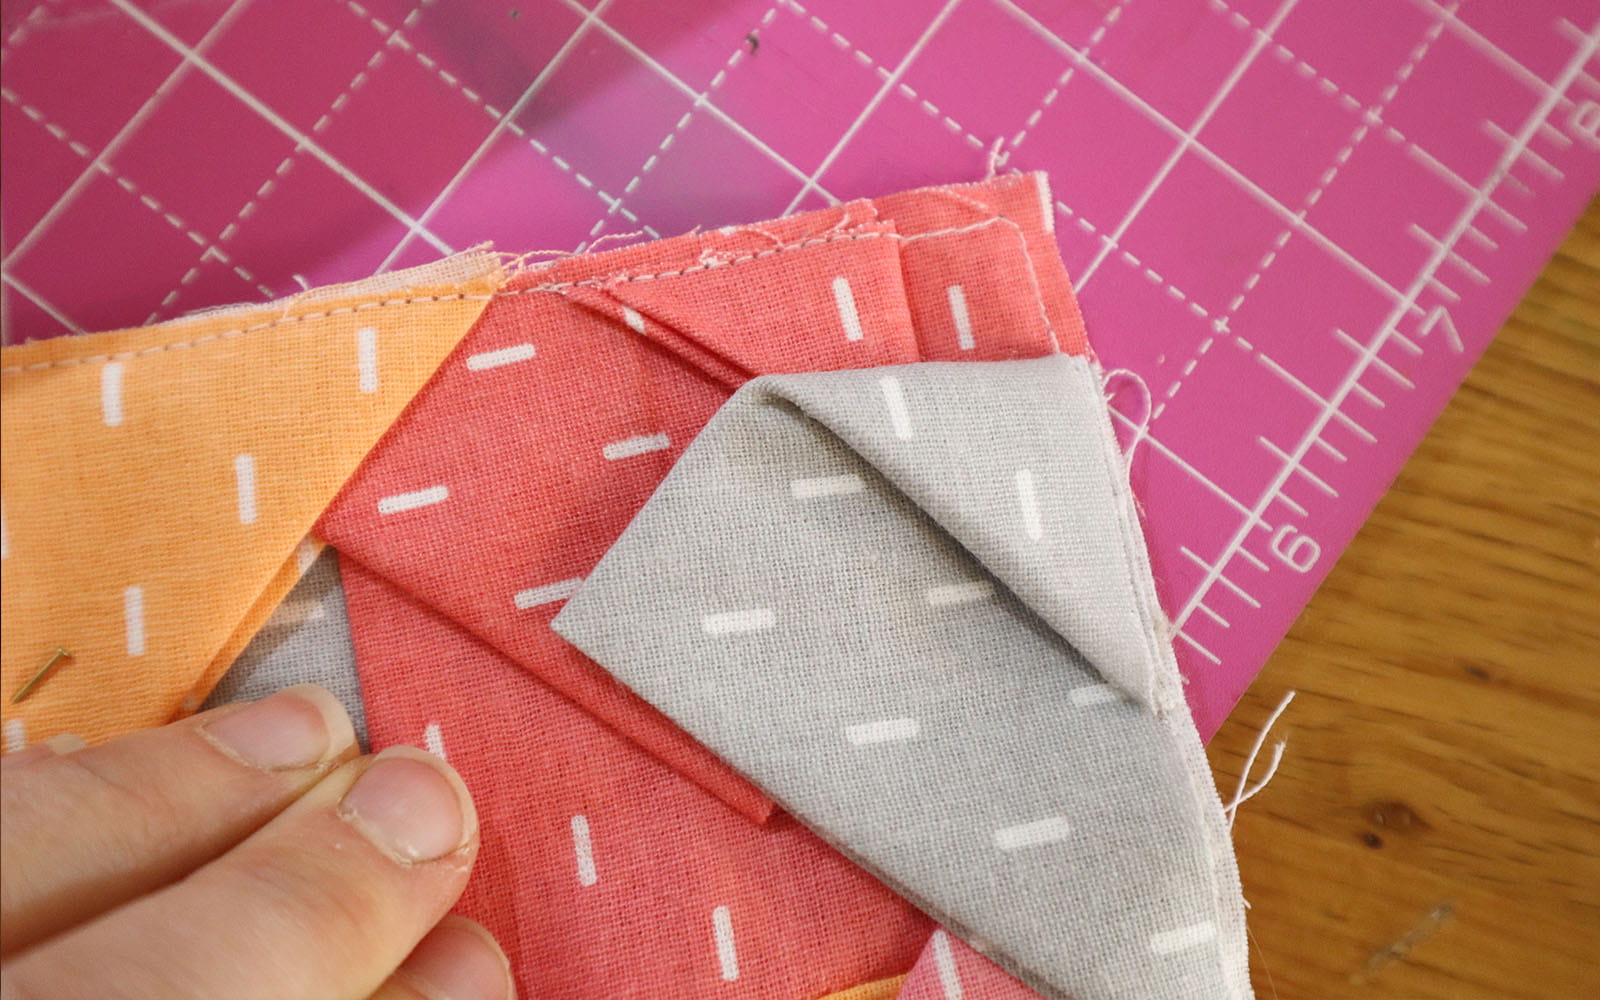 Result of sewn corner of triangle pieces on pink mat